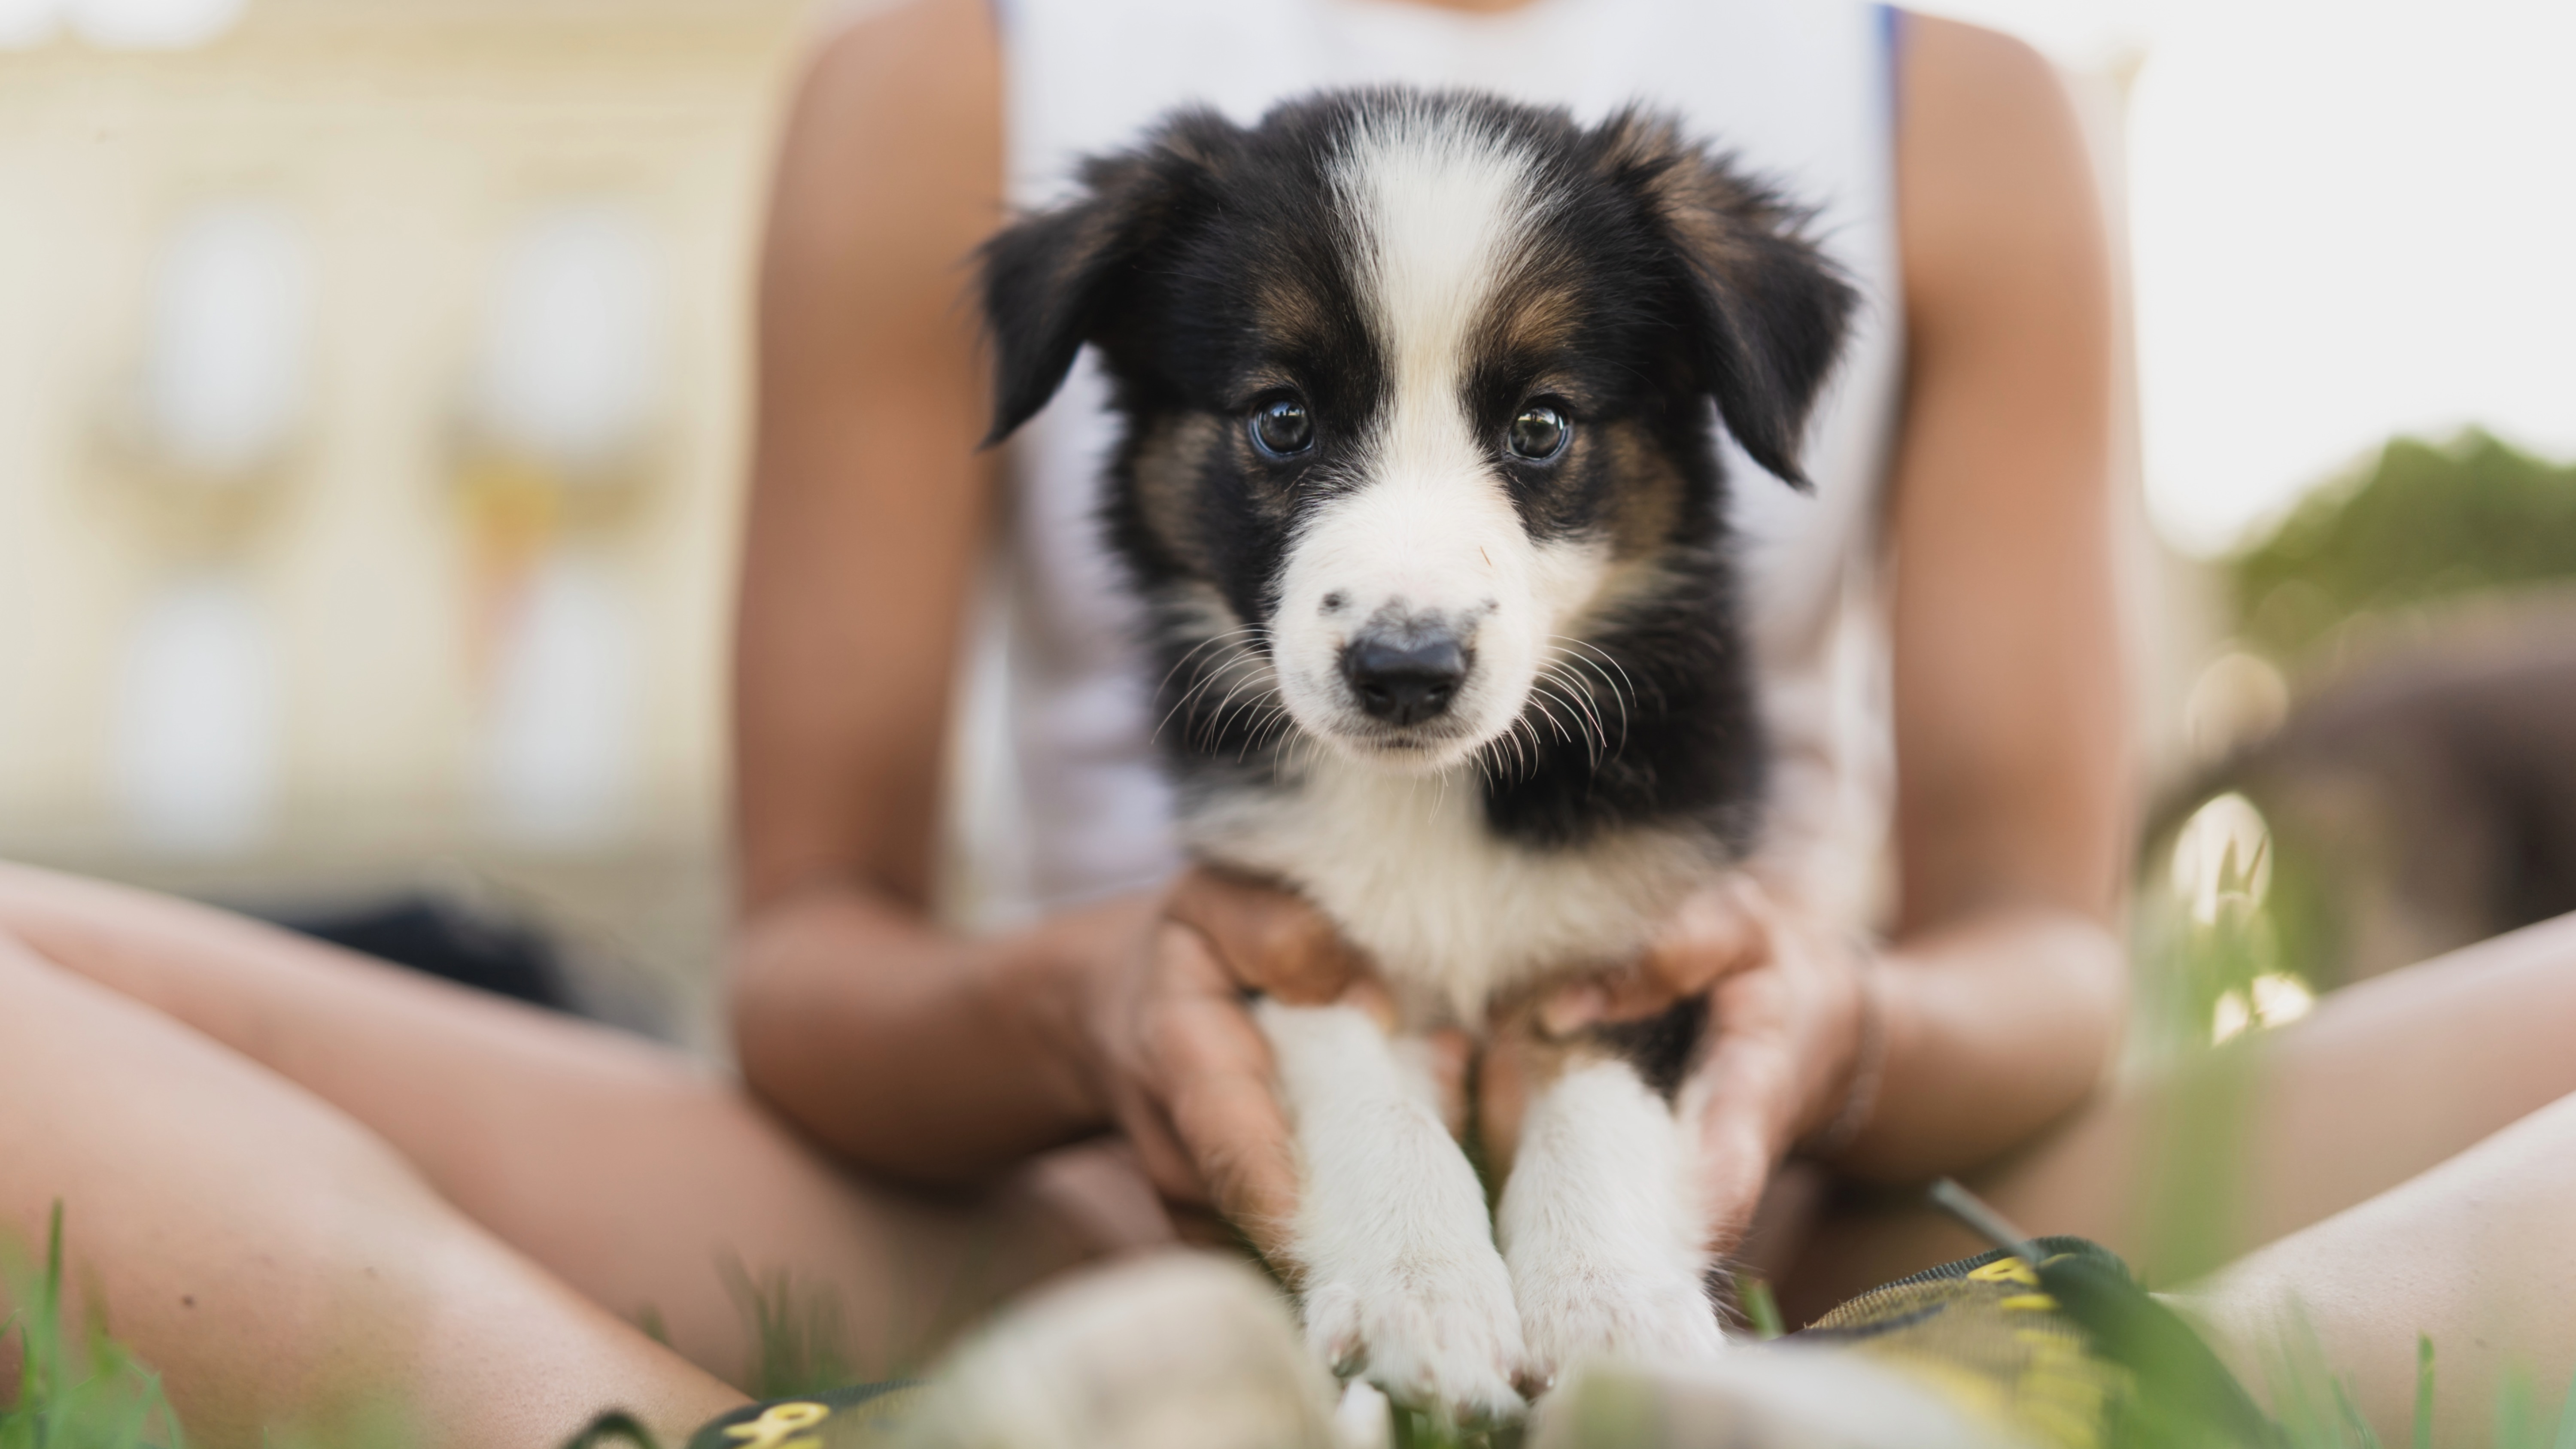 What’s the first thing you should teach your puppy? An expert trainer explains